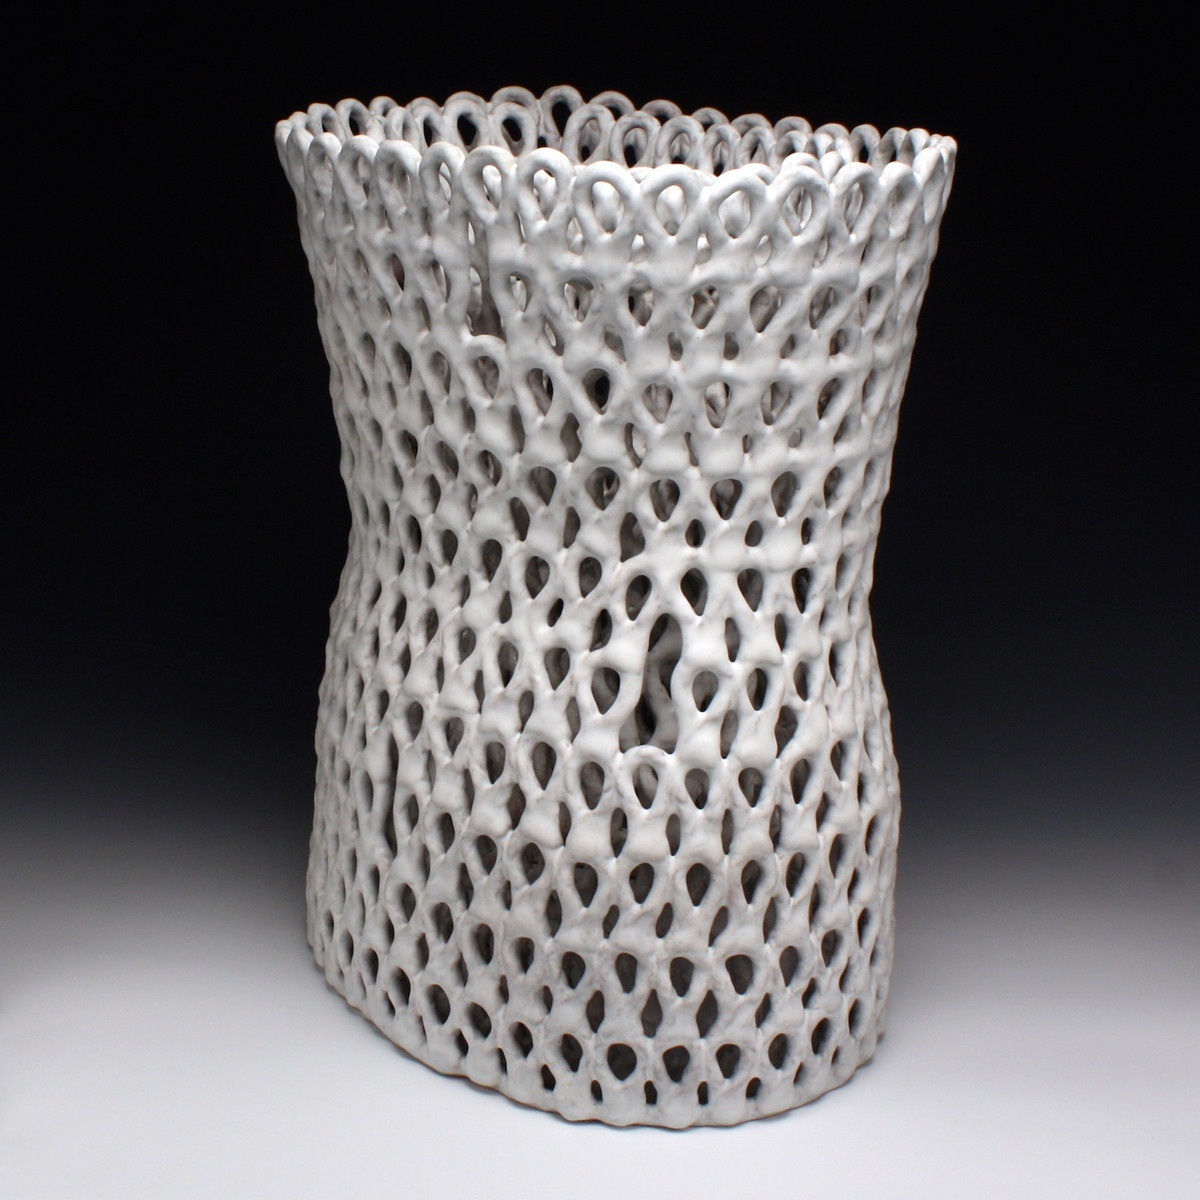 An intricately looped/patterned vessel in white, curved in at the middle, as if emerging from the shadows in the background.